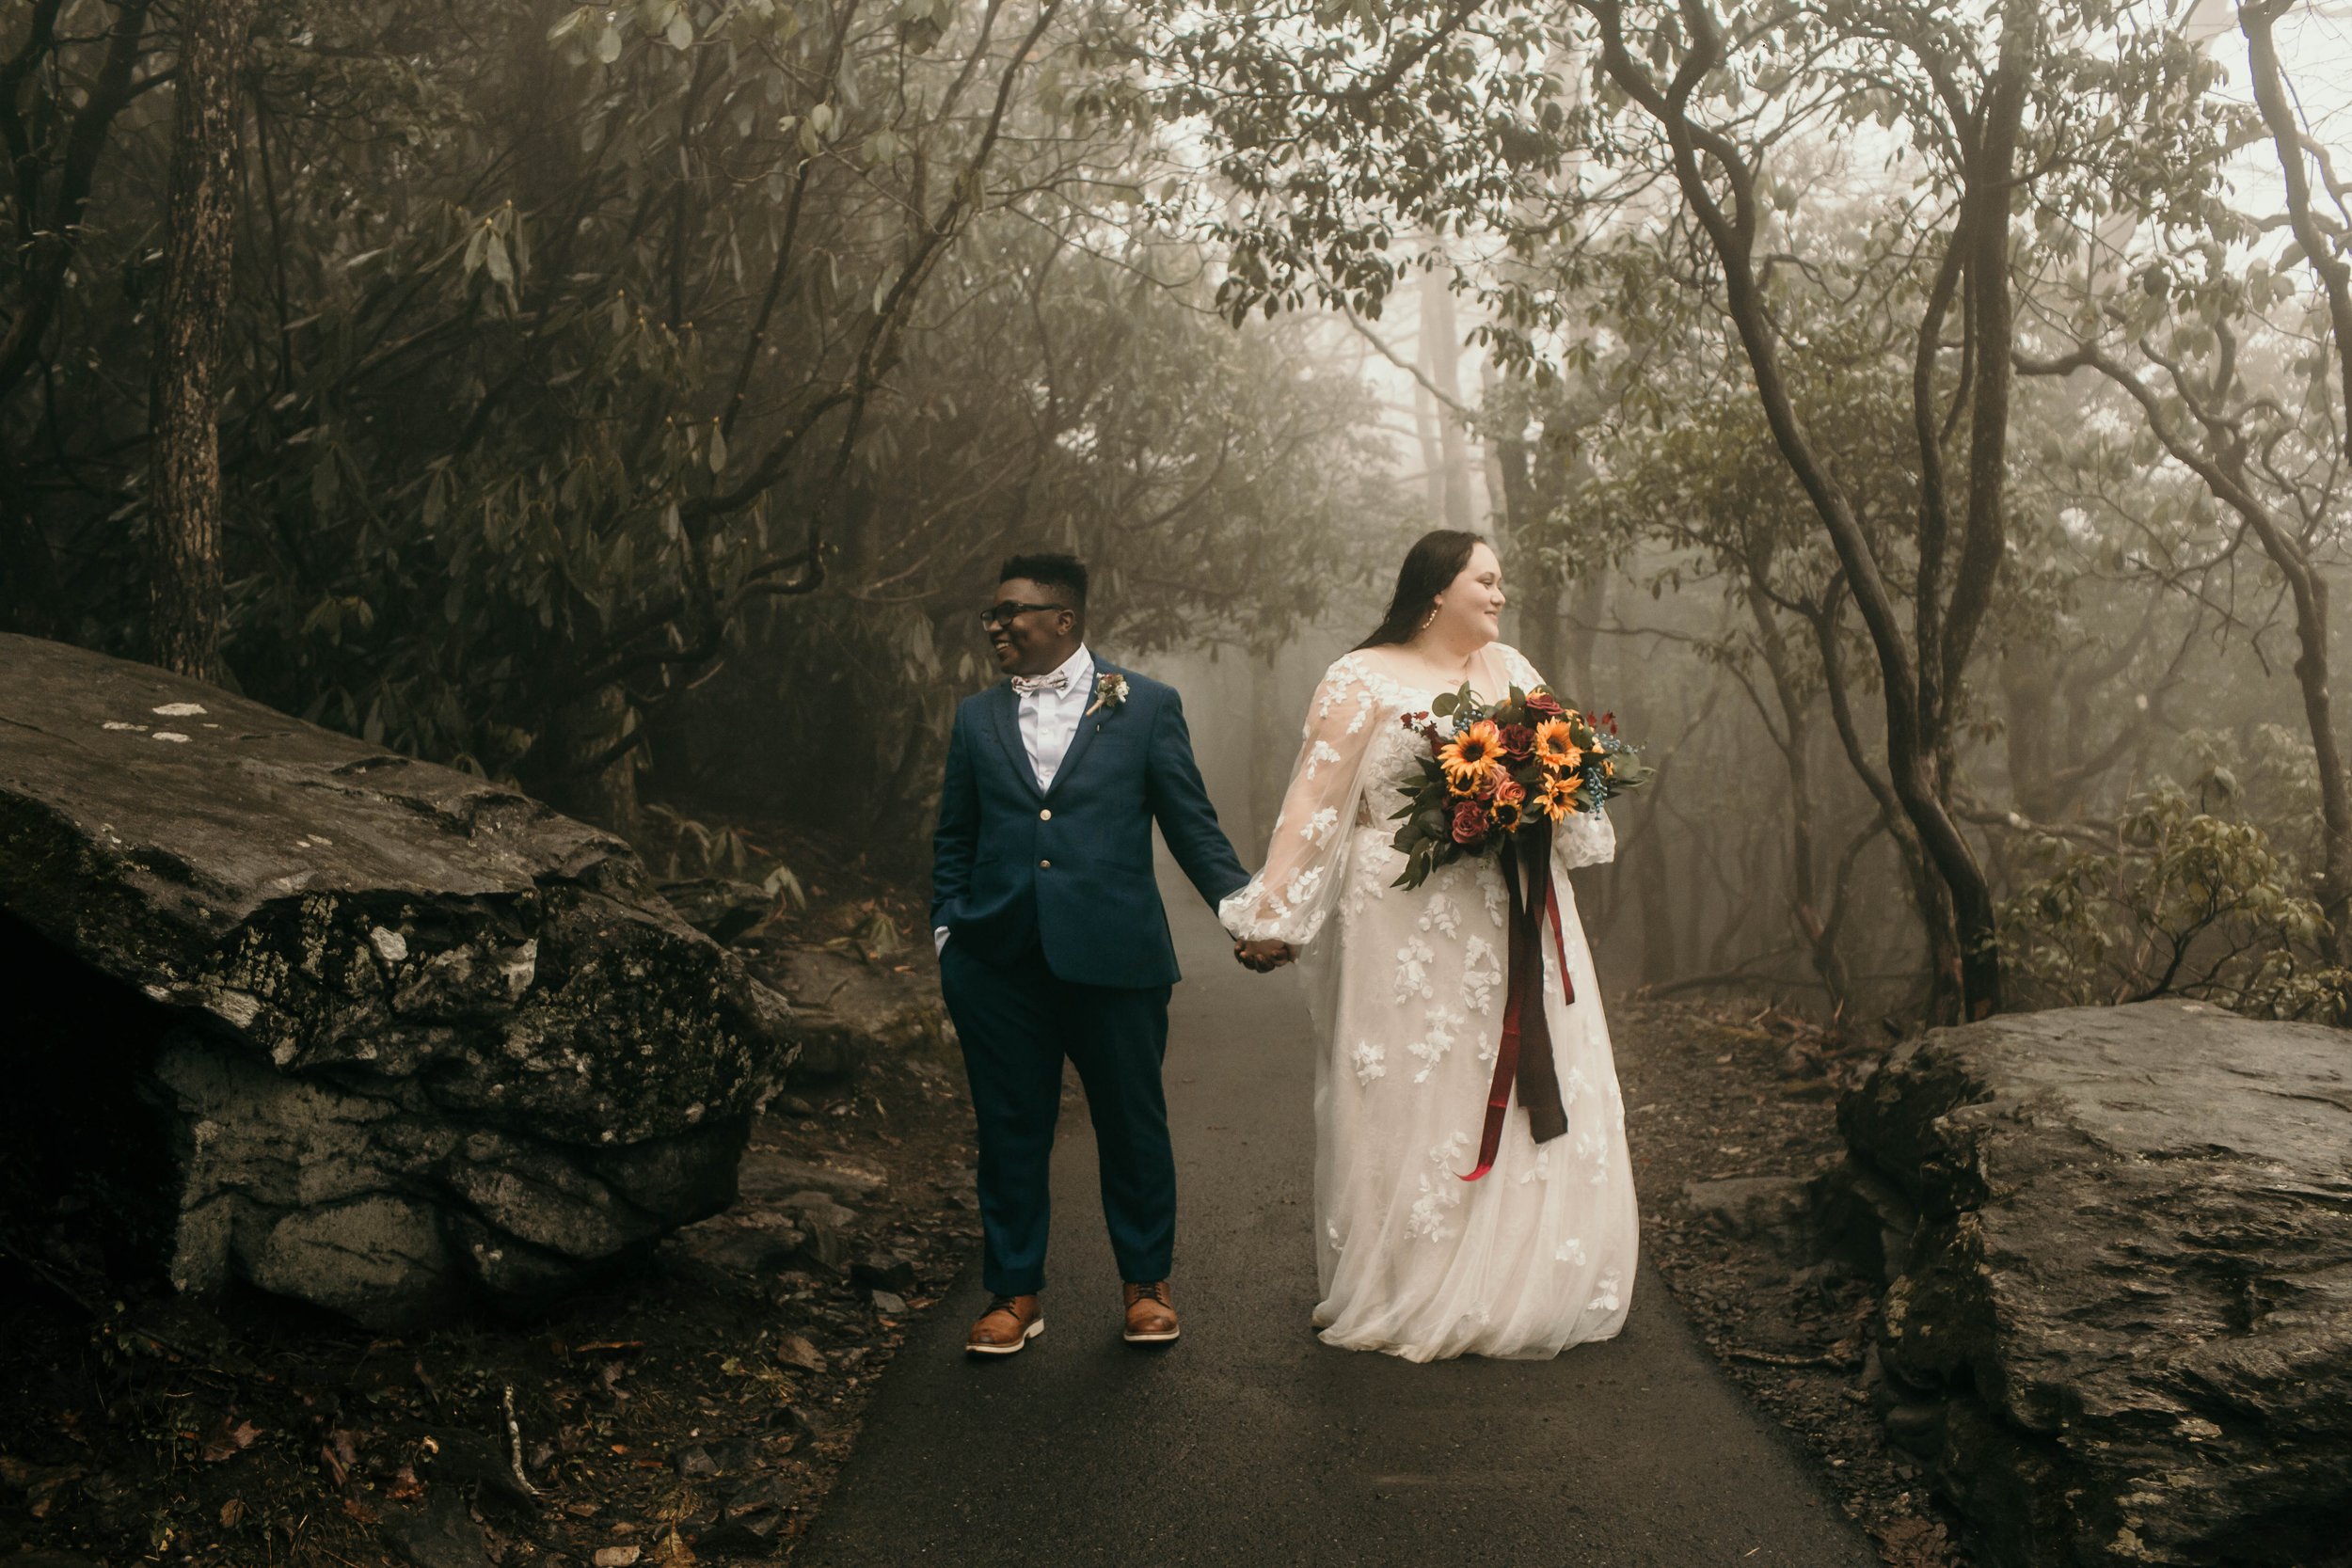  Where to begin? Jasmine is such a talented photographer. I love how Jasmine not only captures the moment between me and my partner but also incorporates the environment around you to bring together the most magical session. Jasmine has the best pers